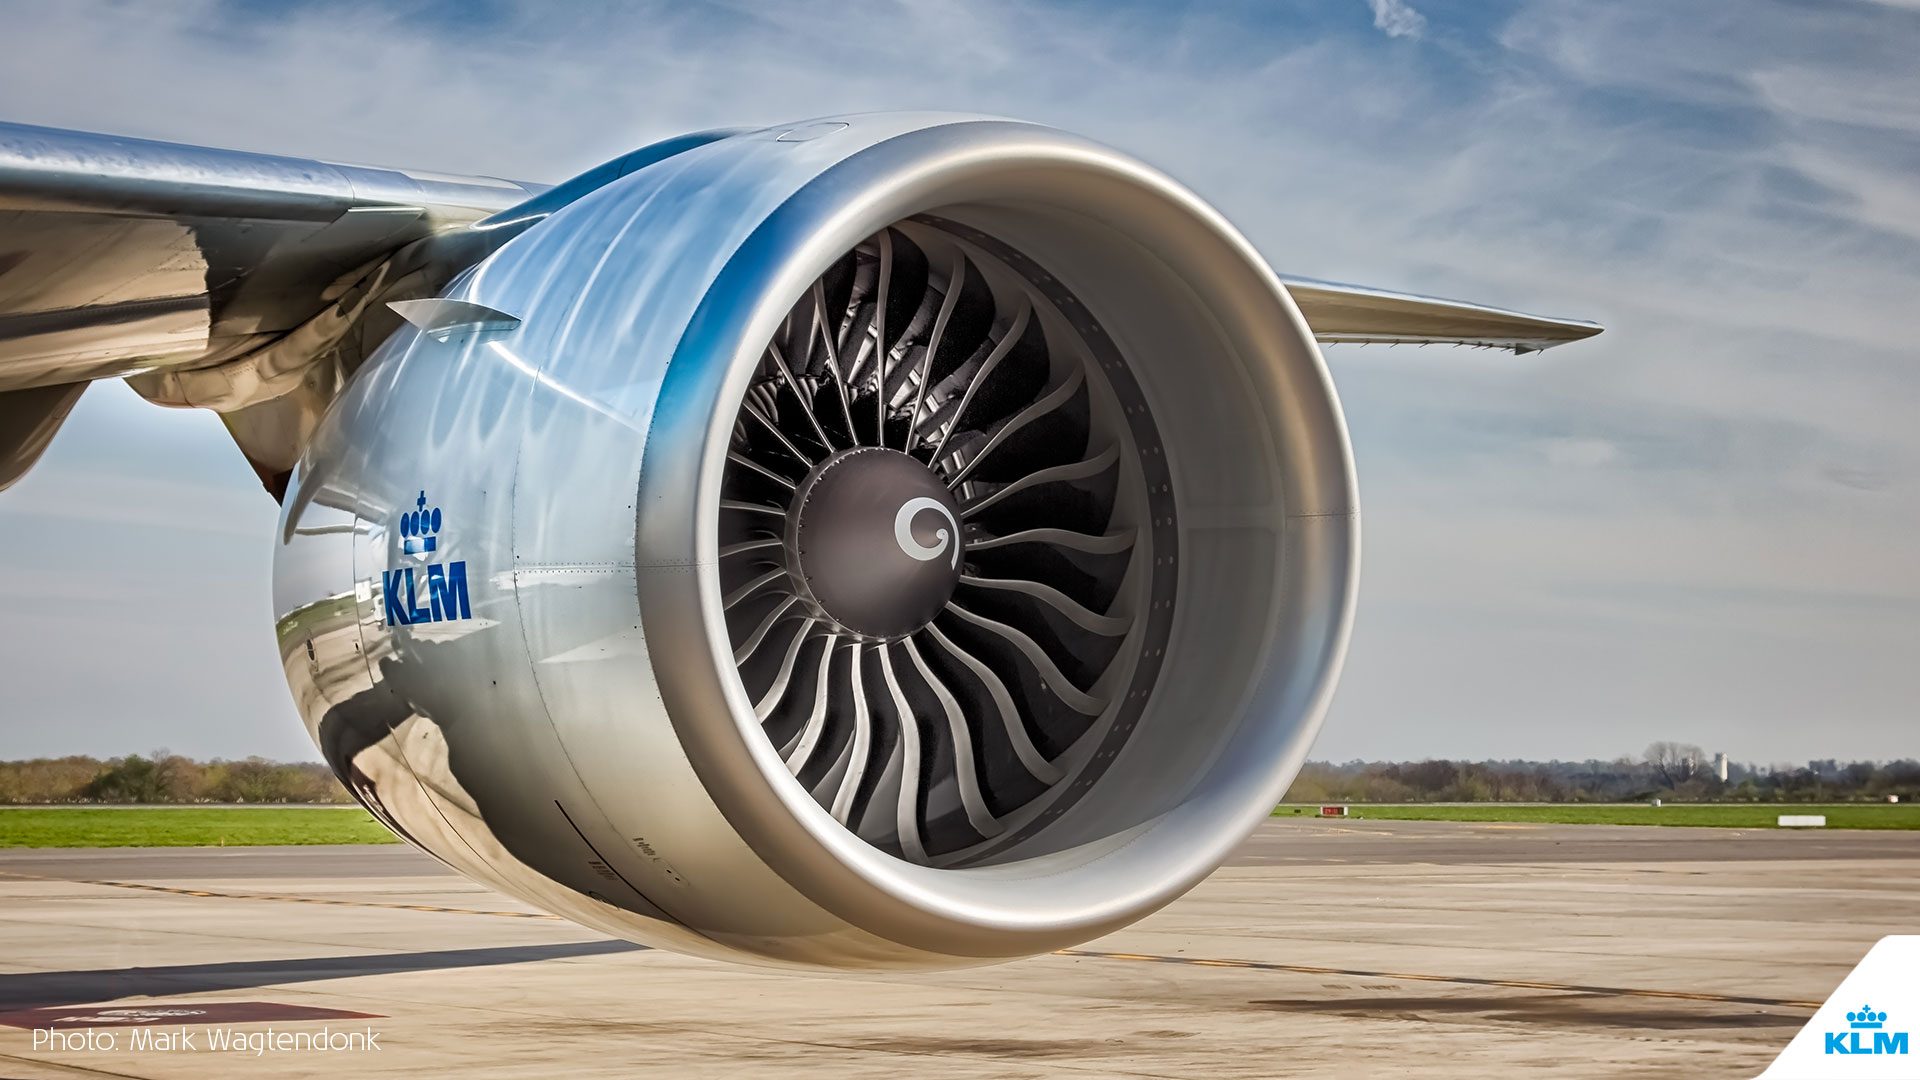 research about aircraft engines